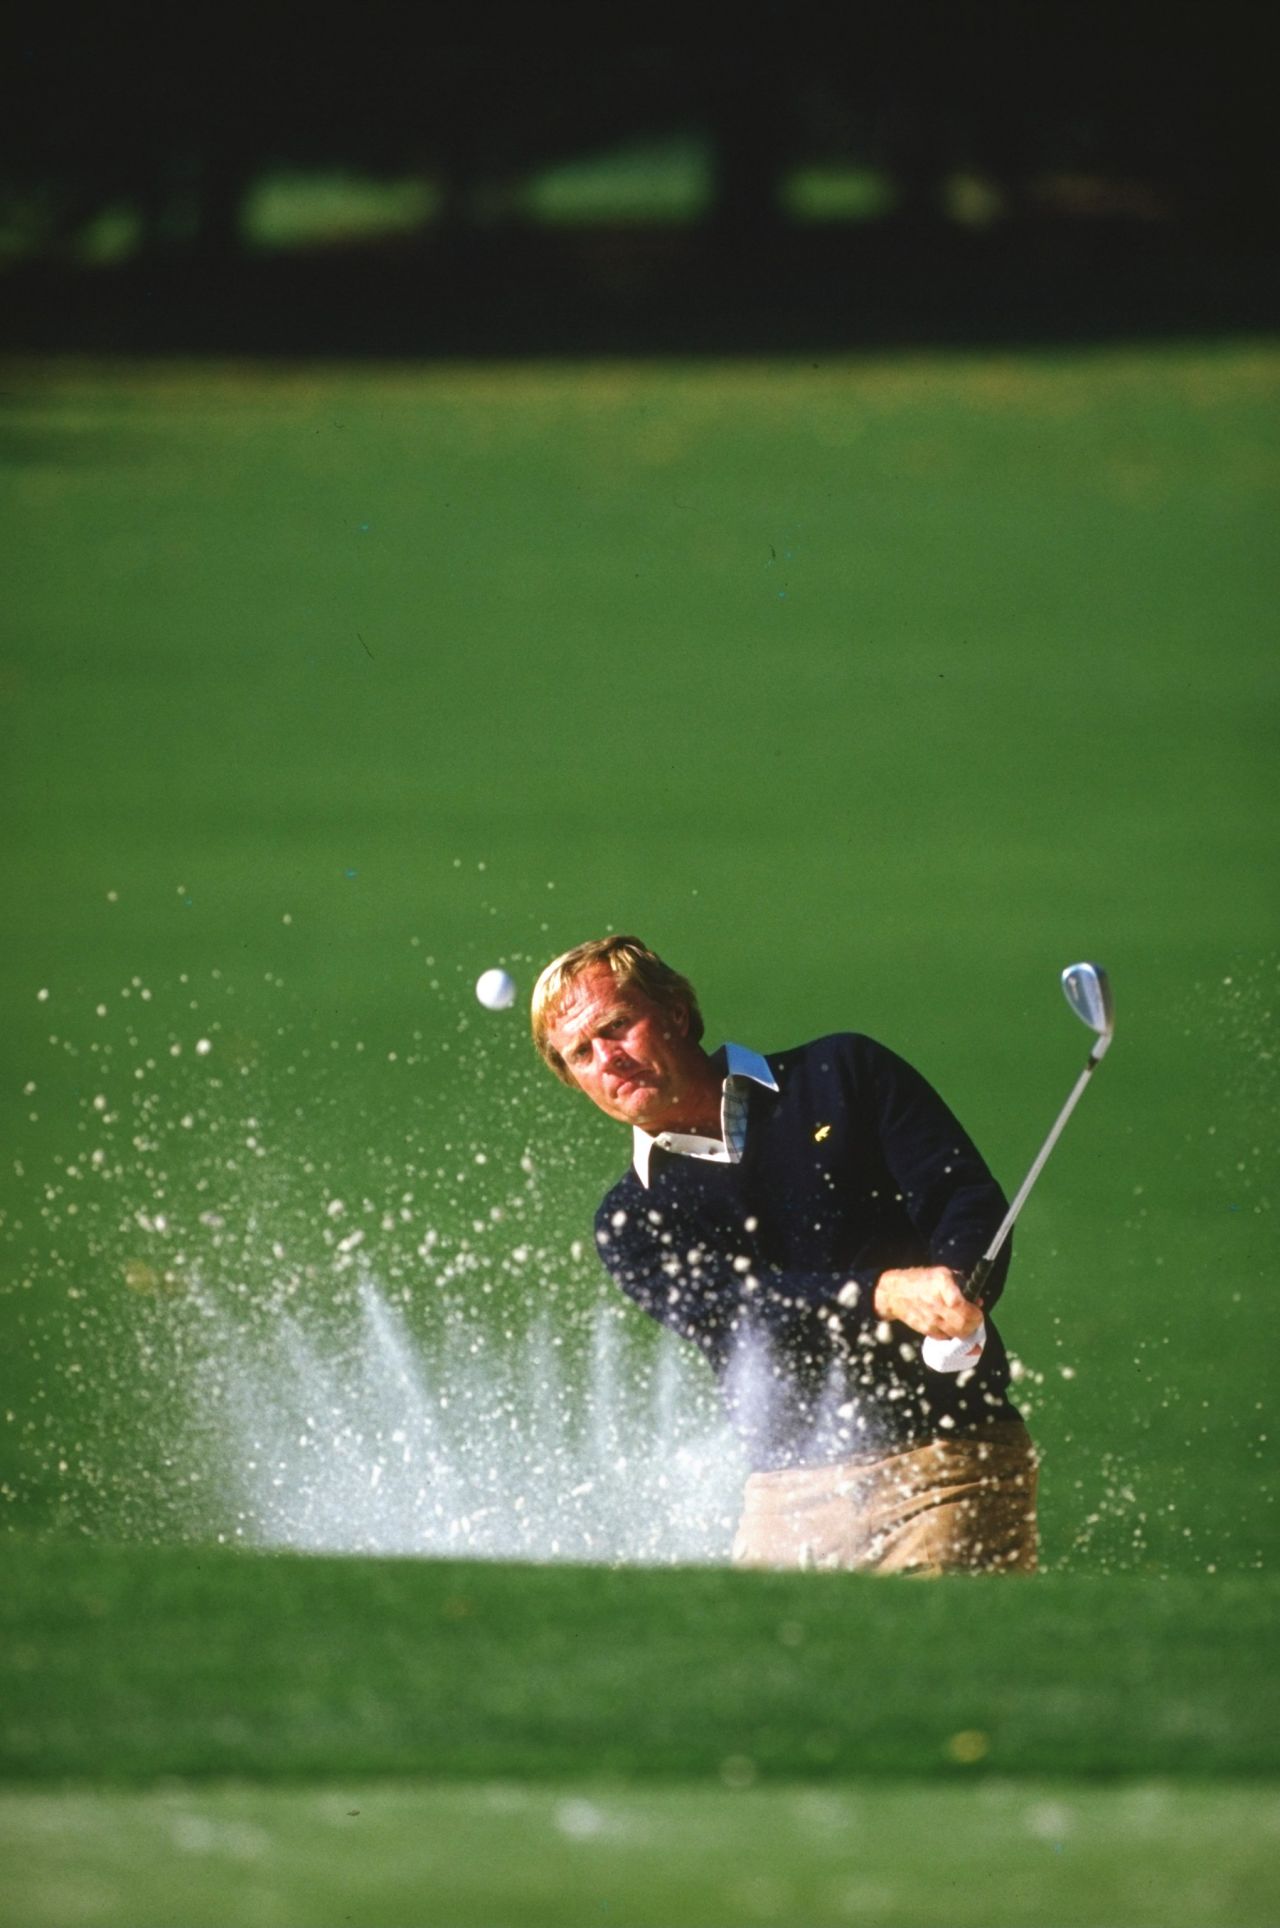 This snap of Nicklaus practicing at the 1986 Masters, where he won his sixth and final green jacket, was "a really lucky picture to get because of the way the sand exploded during the shot." <br /><br />"In 33 years of photographing golf, I have never seen an 'explosion' as perfect as this," said Cannon. "To capture this shot in the same week as he won his final major was a great thrill."